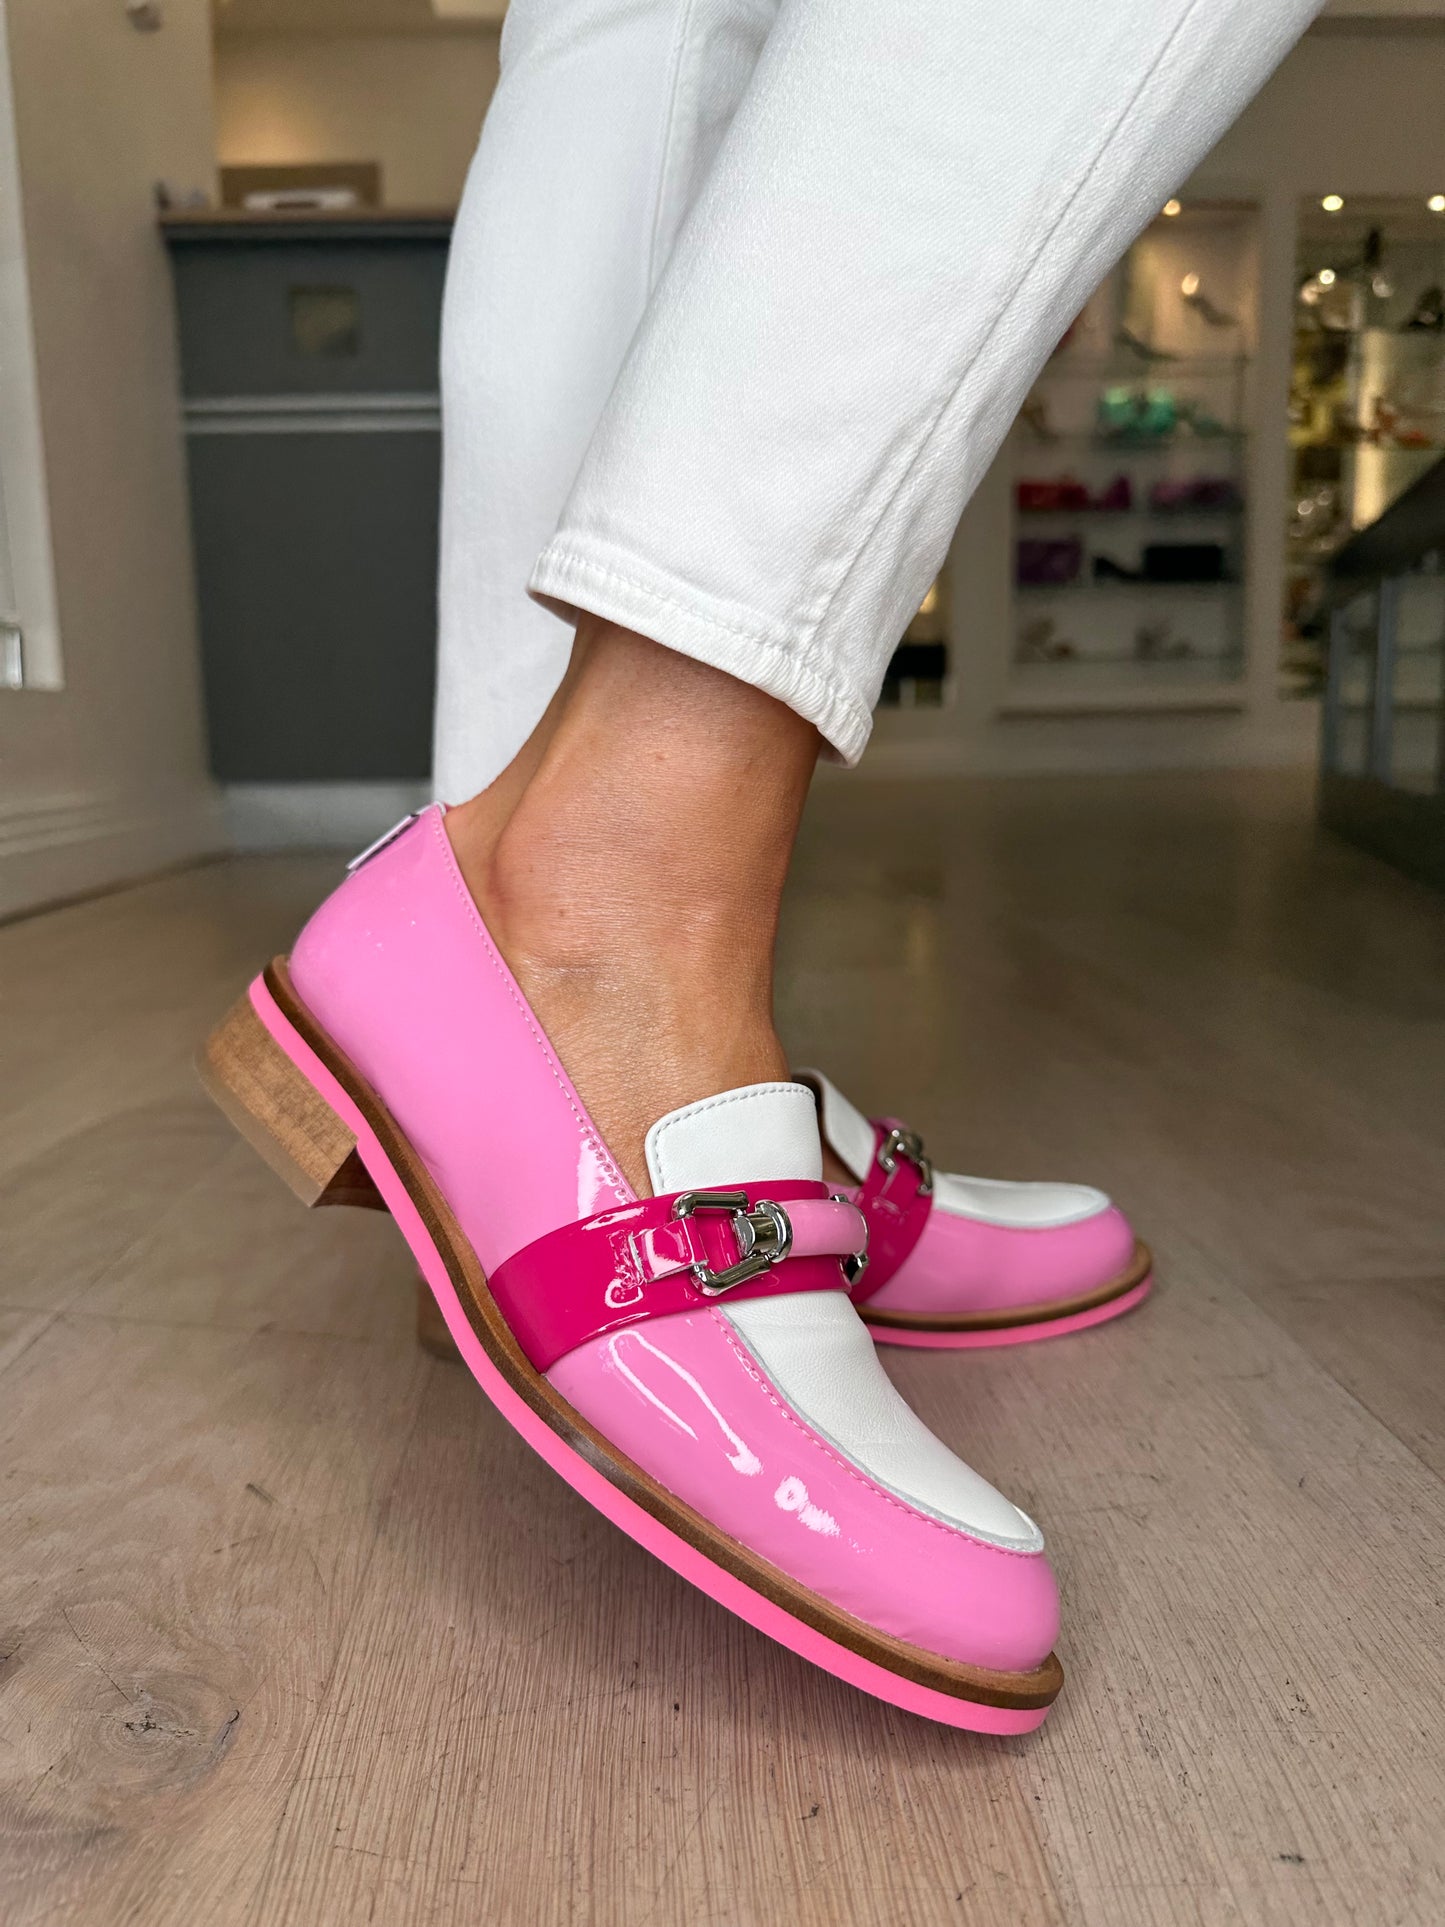 Marco Moreo -Barbie Pink Patent Loafer With Hot Pink/White Patent Trim